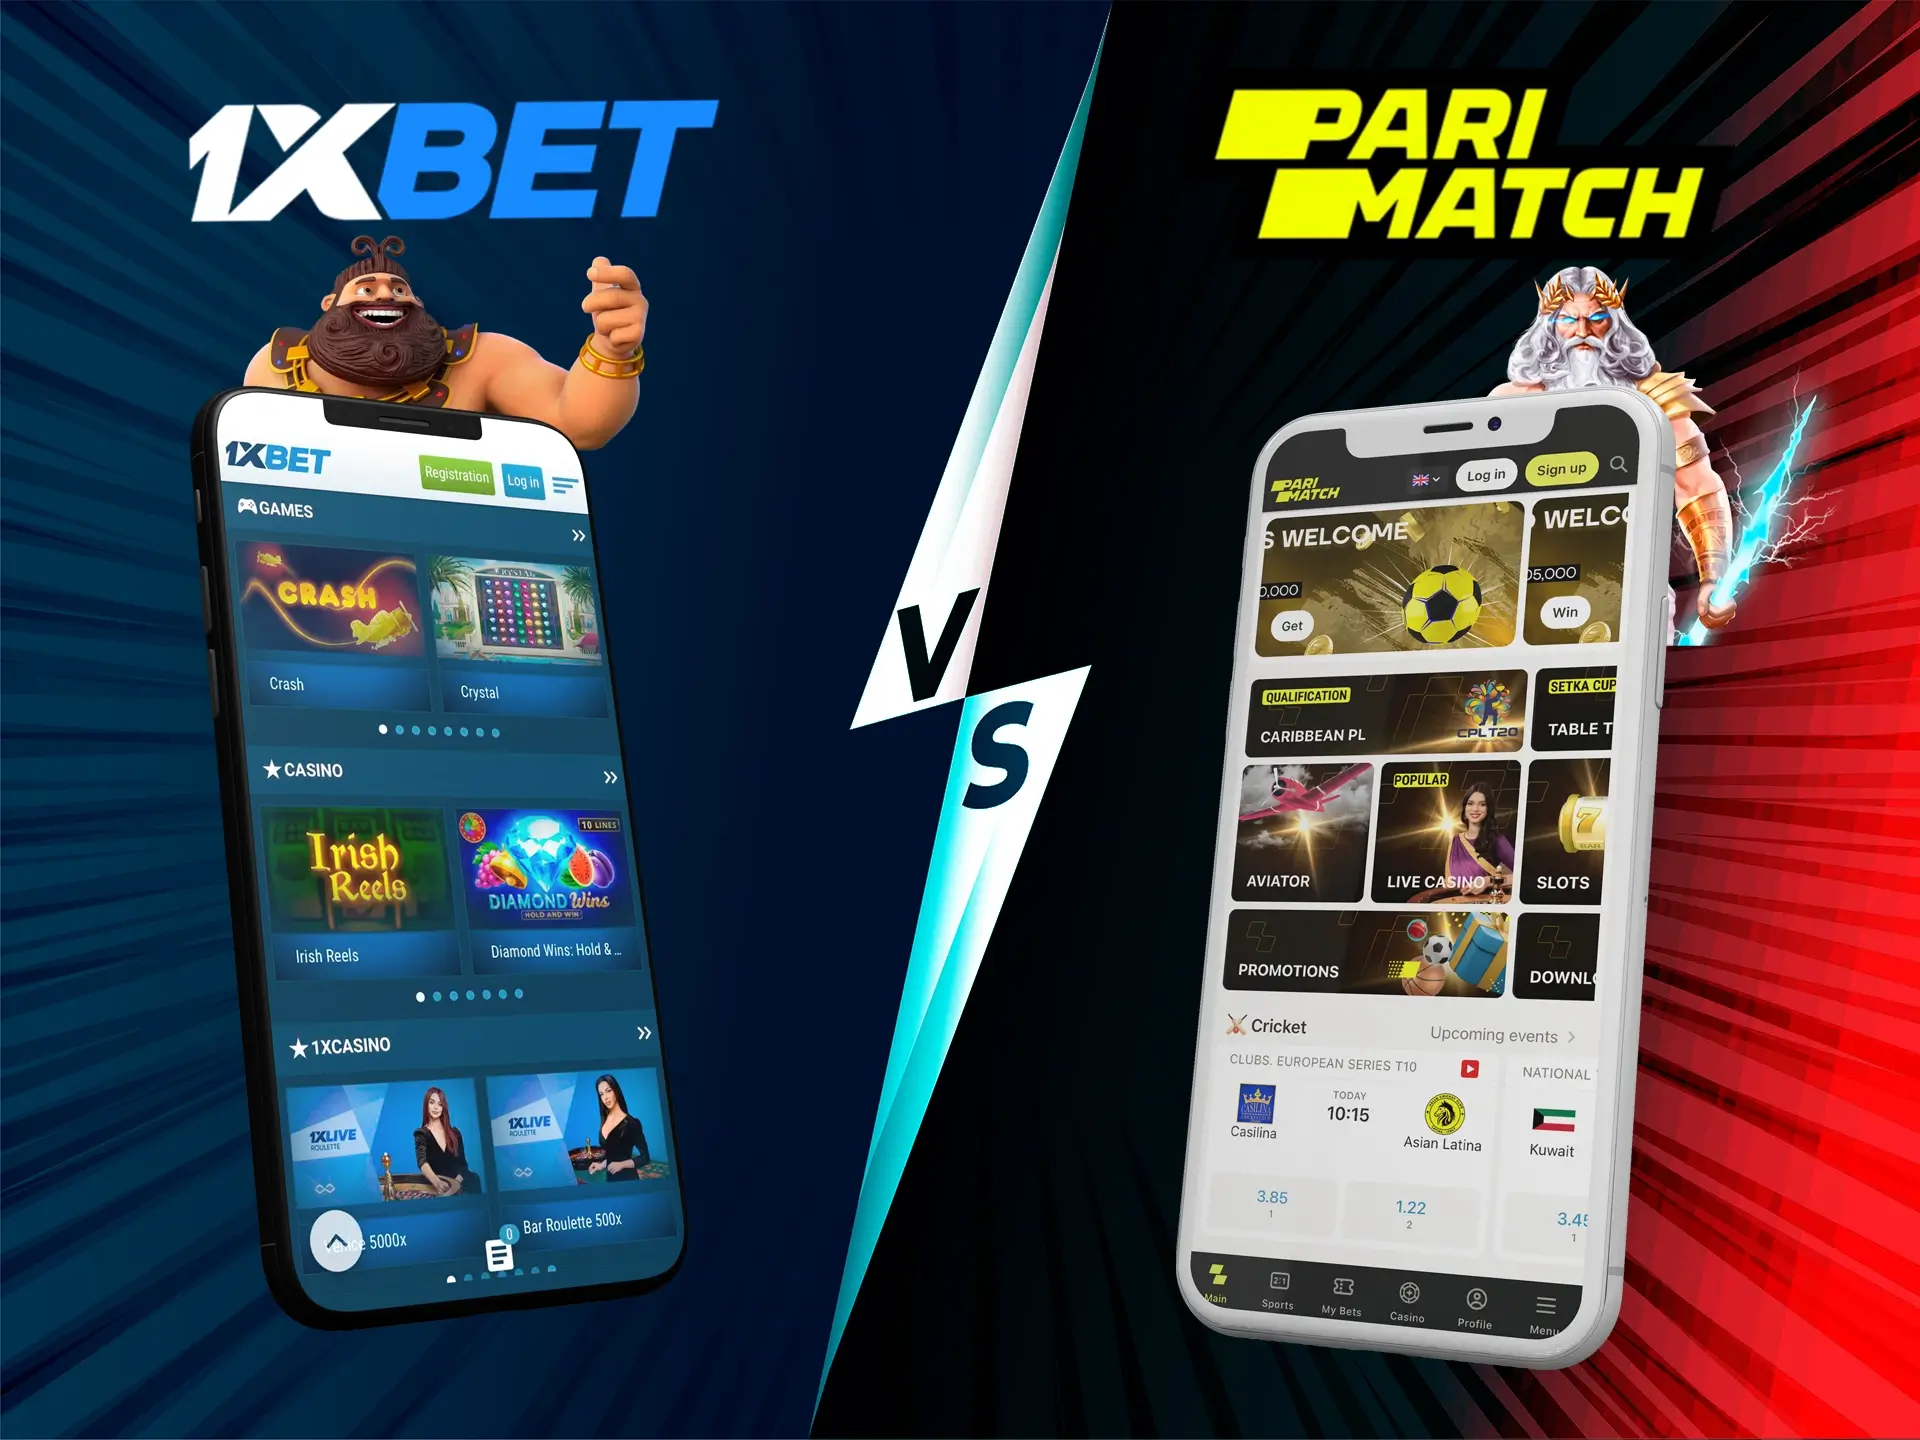 Try the mobile app from 1xbet or Parimatch.